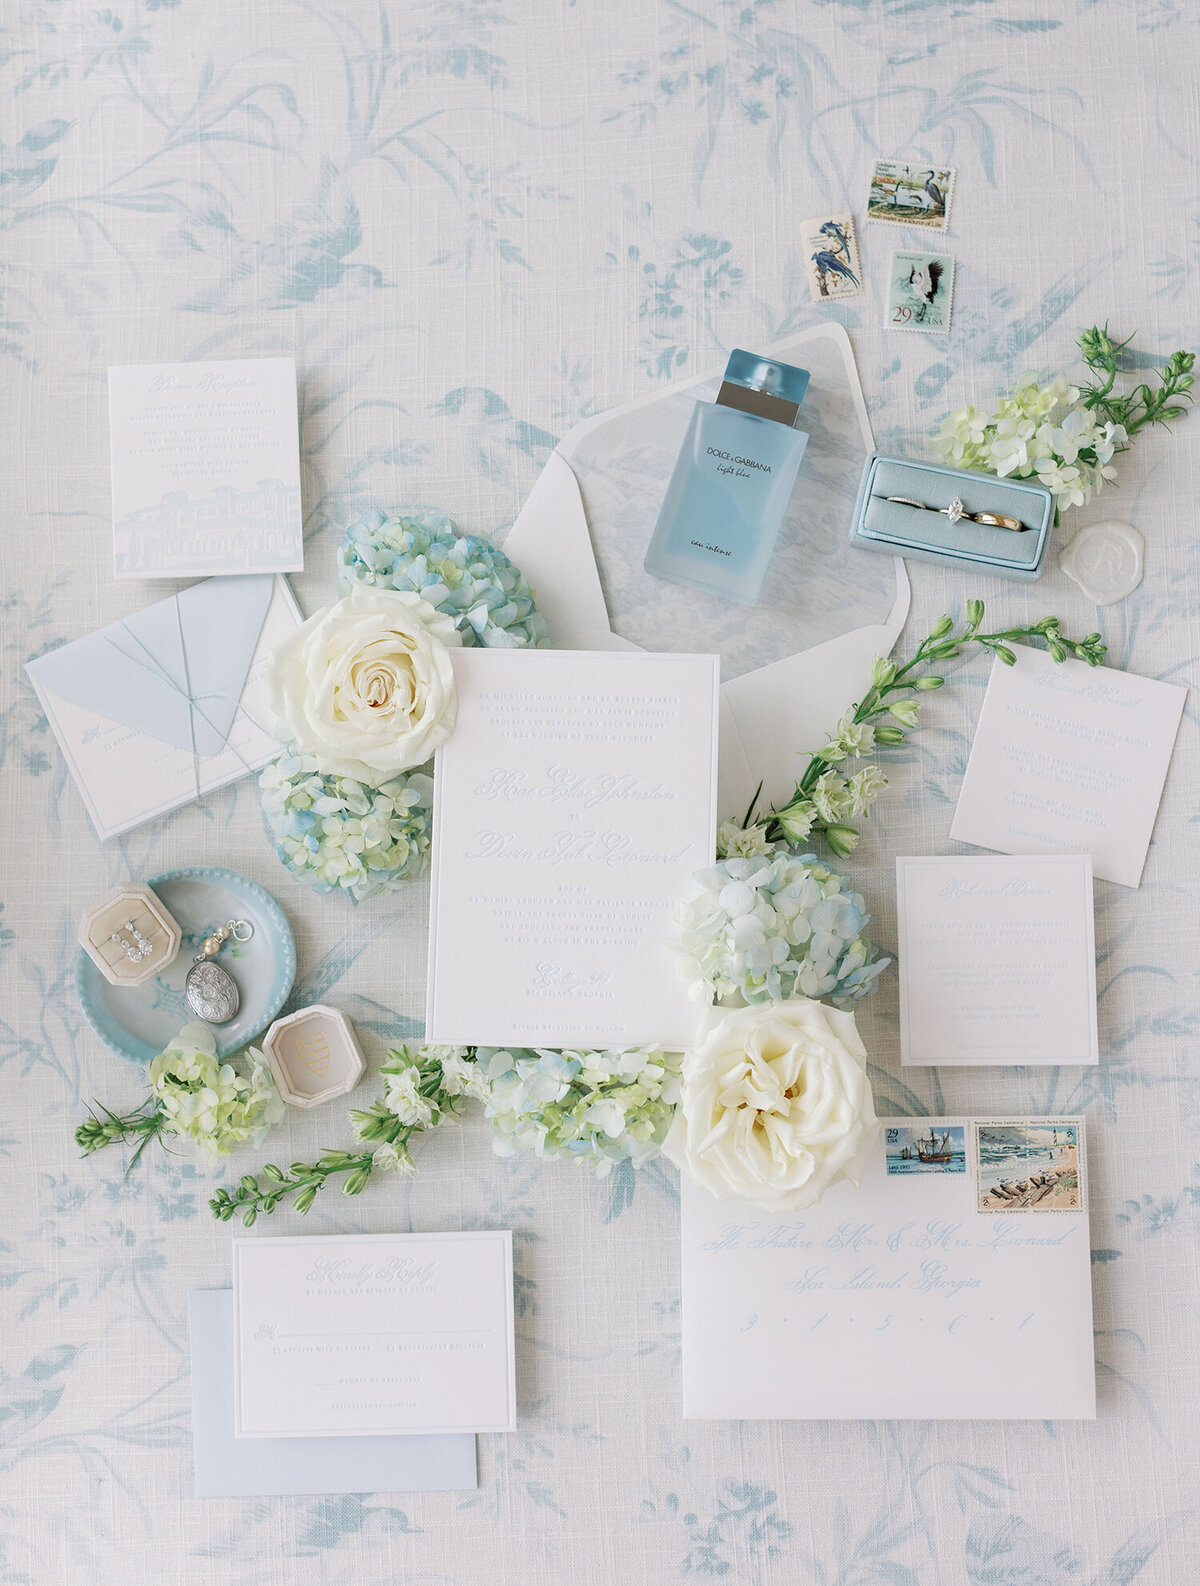 Wedding invitations sitting on a white background with blue flowers.